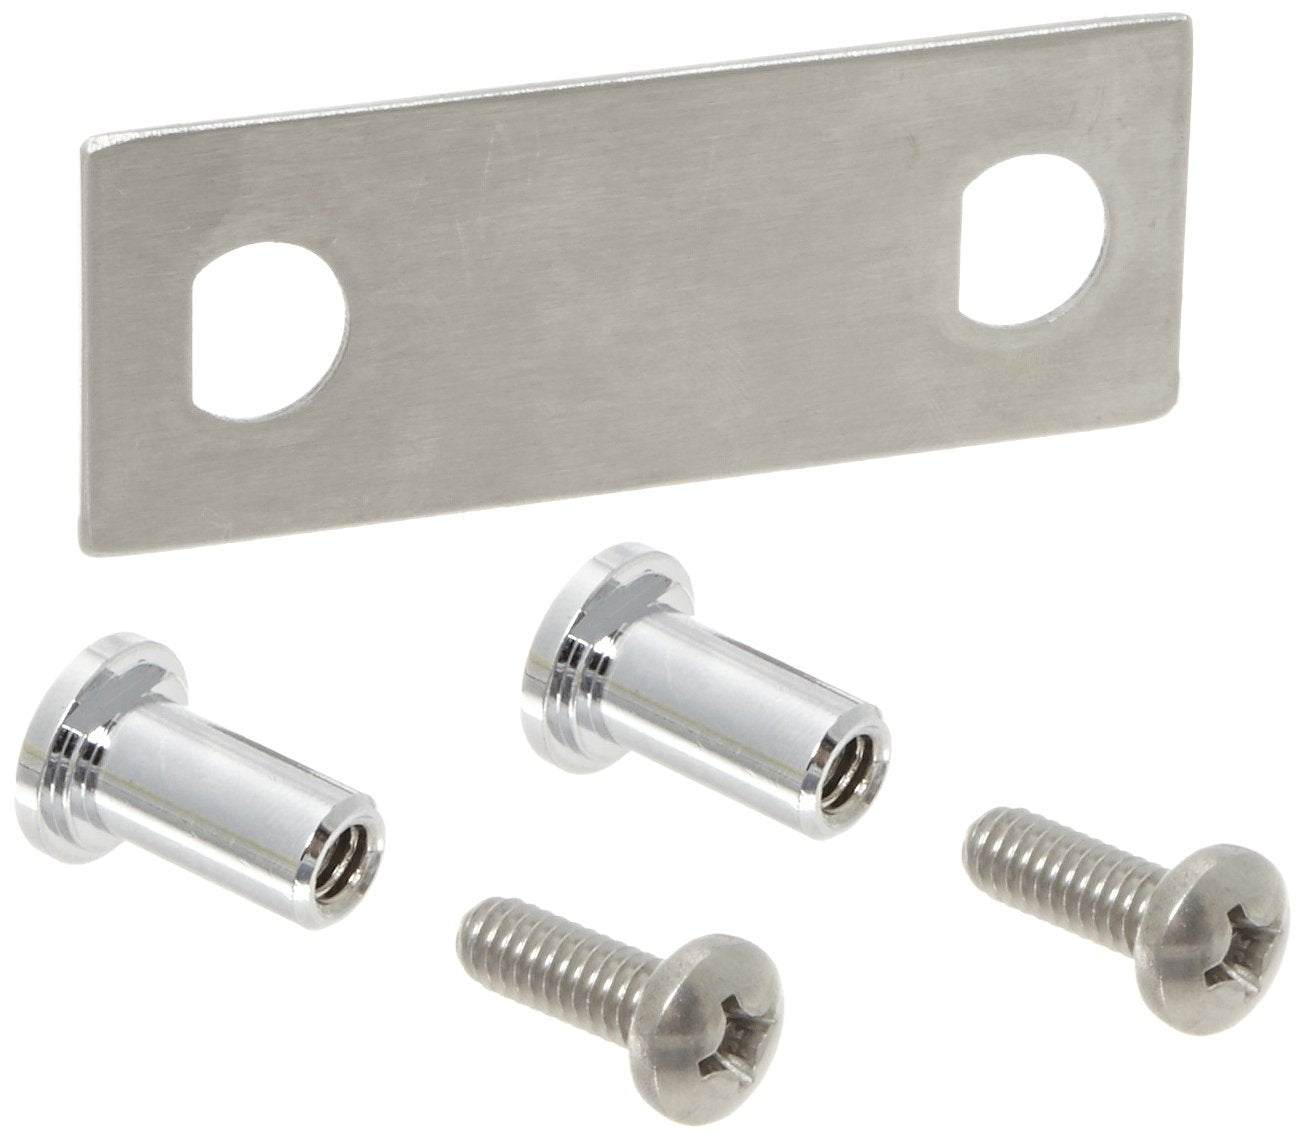 Bobrick 2583 - Optional Anchor Device, For Installation of Individual Grab Bars Through 3/4" to 1" T